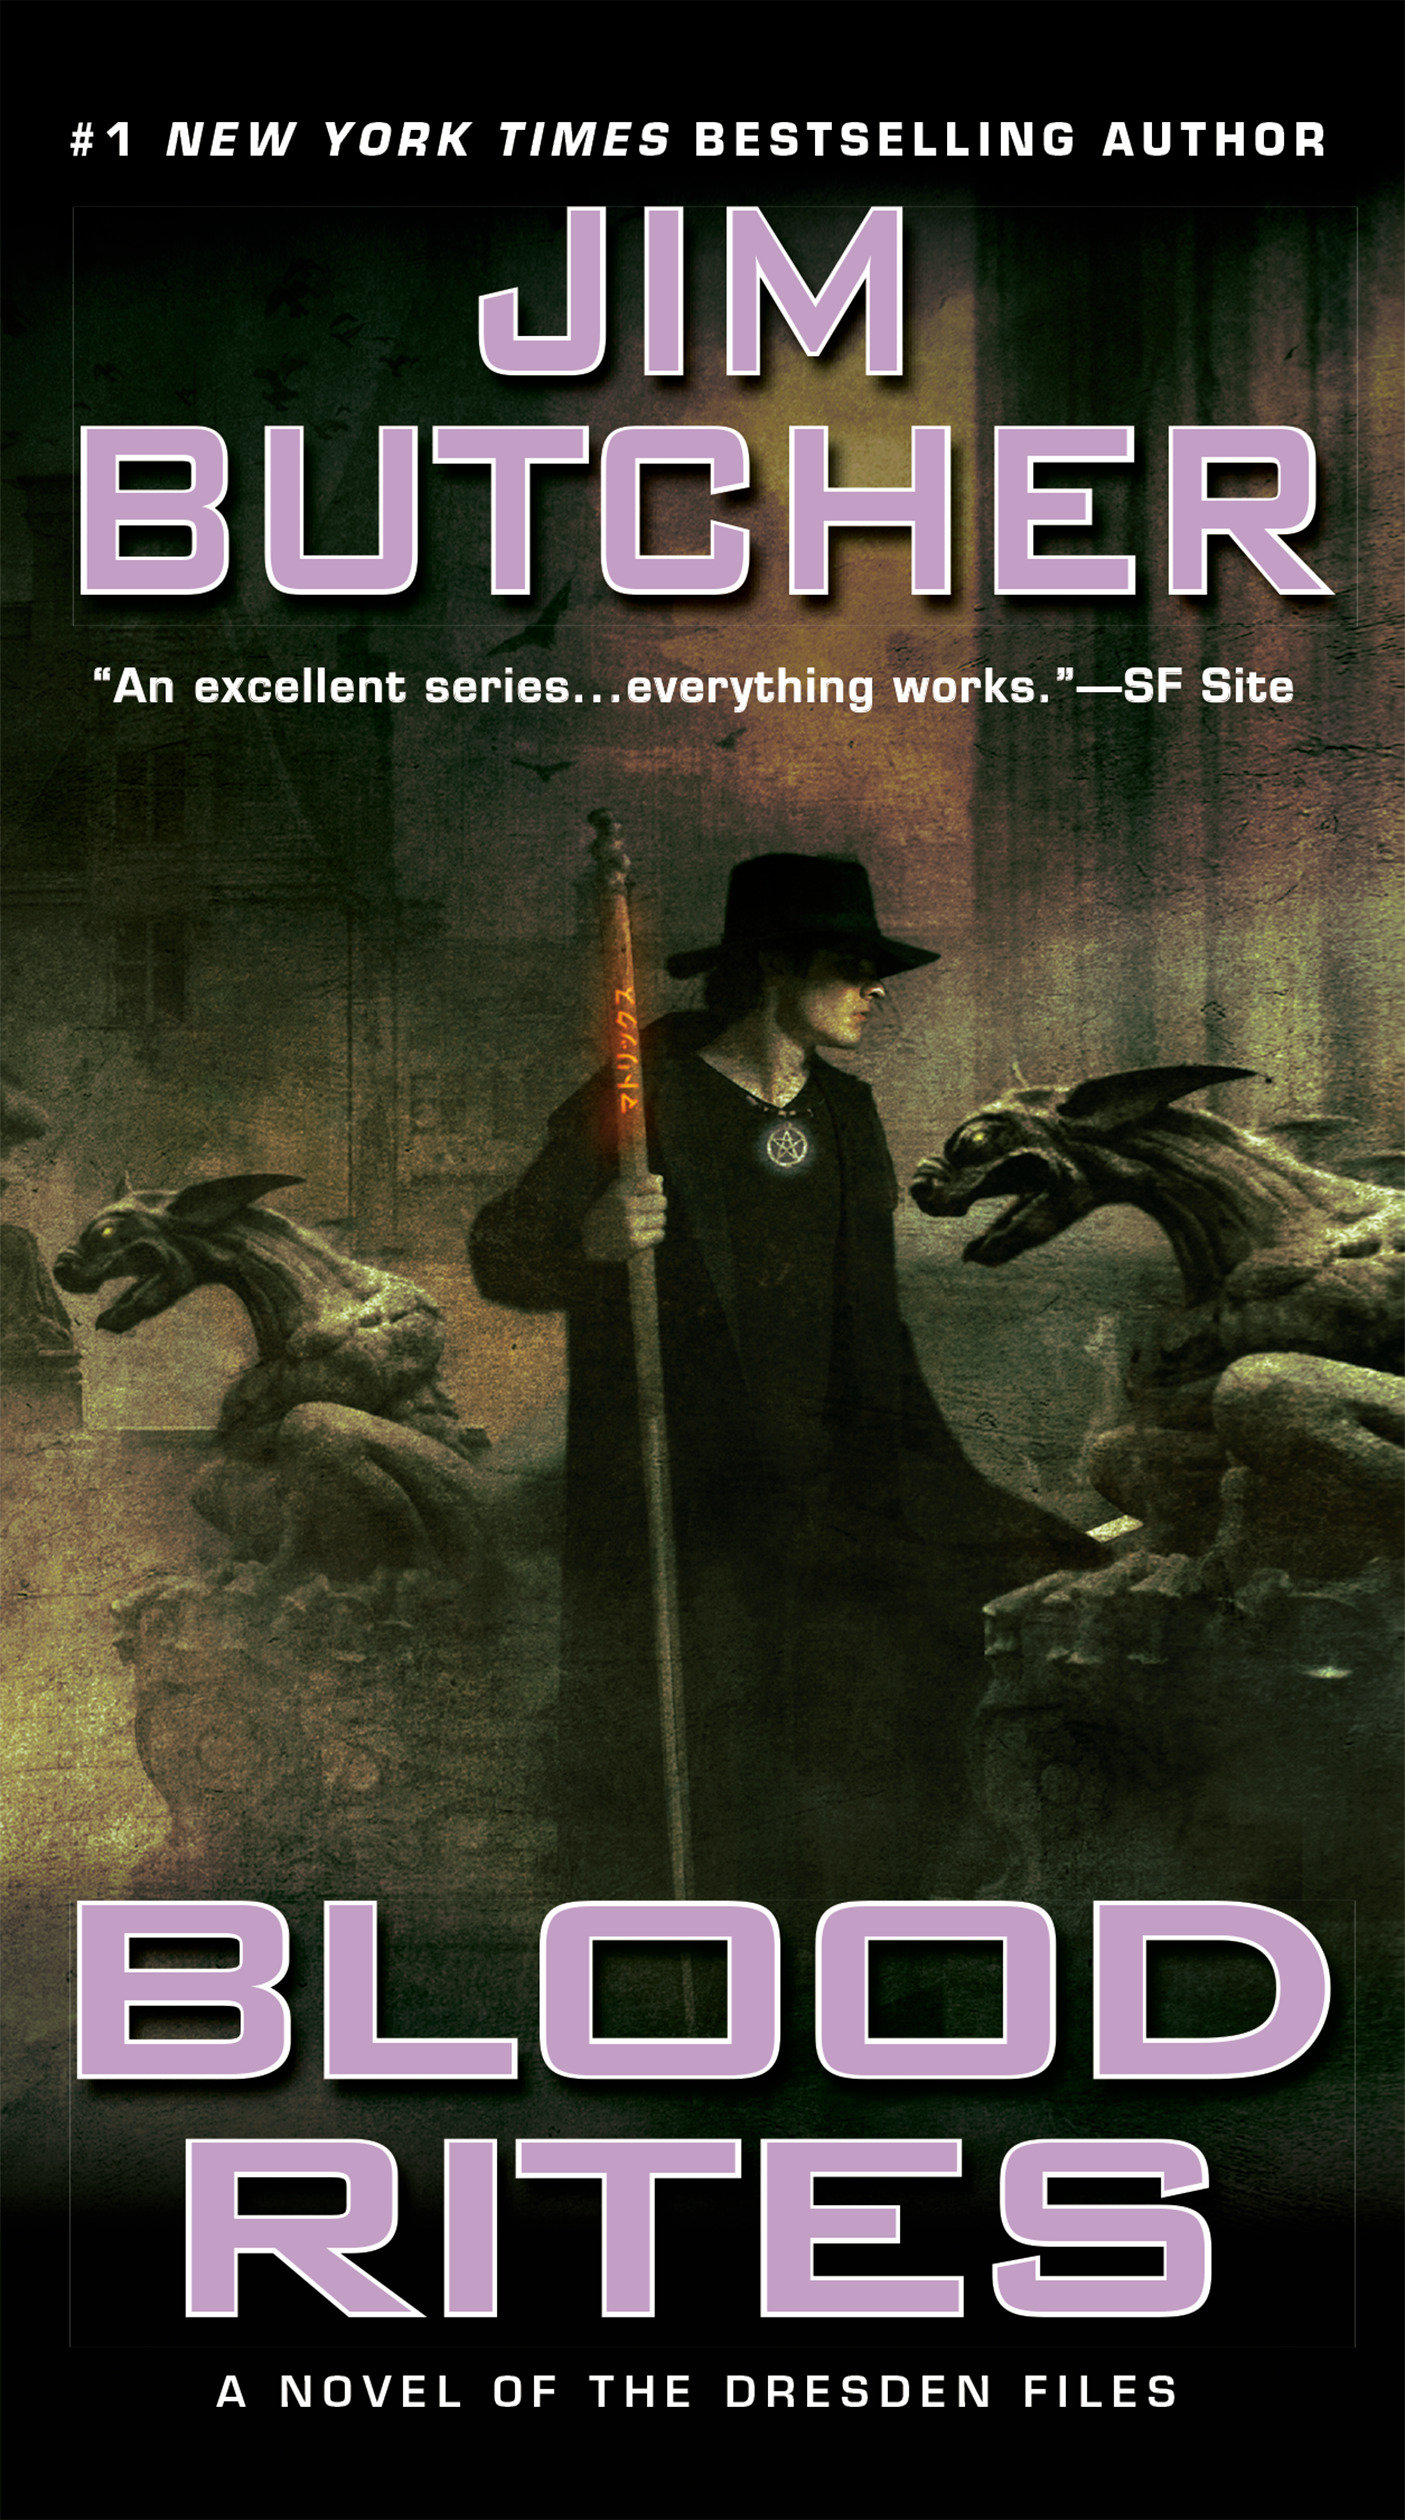 Blood rites cover image